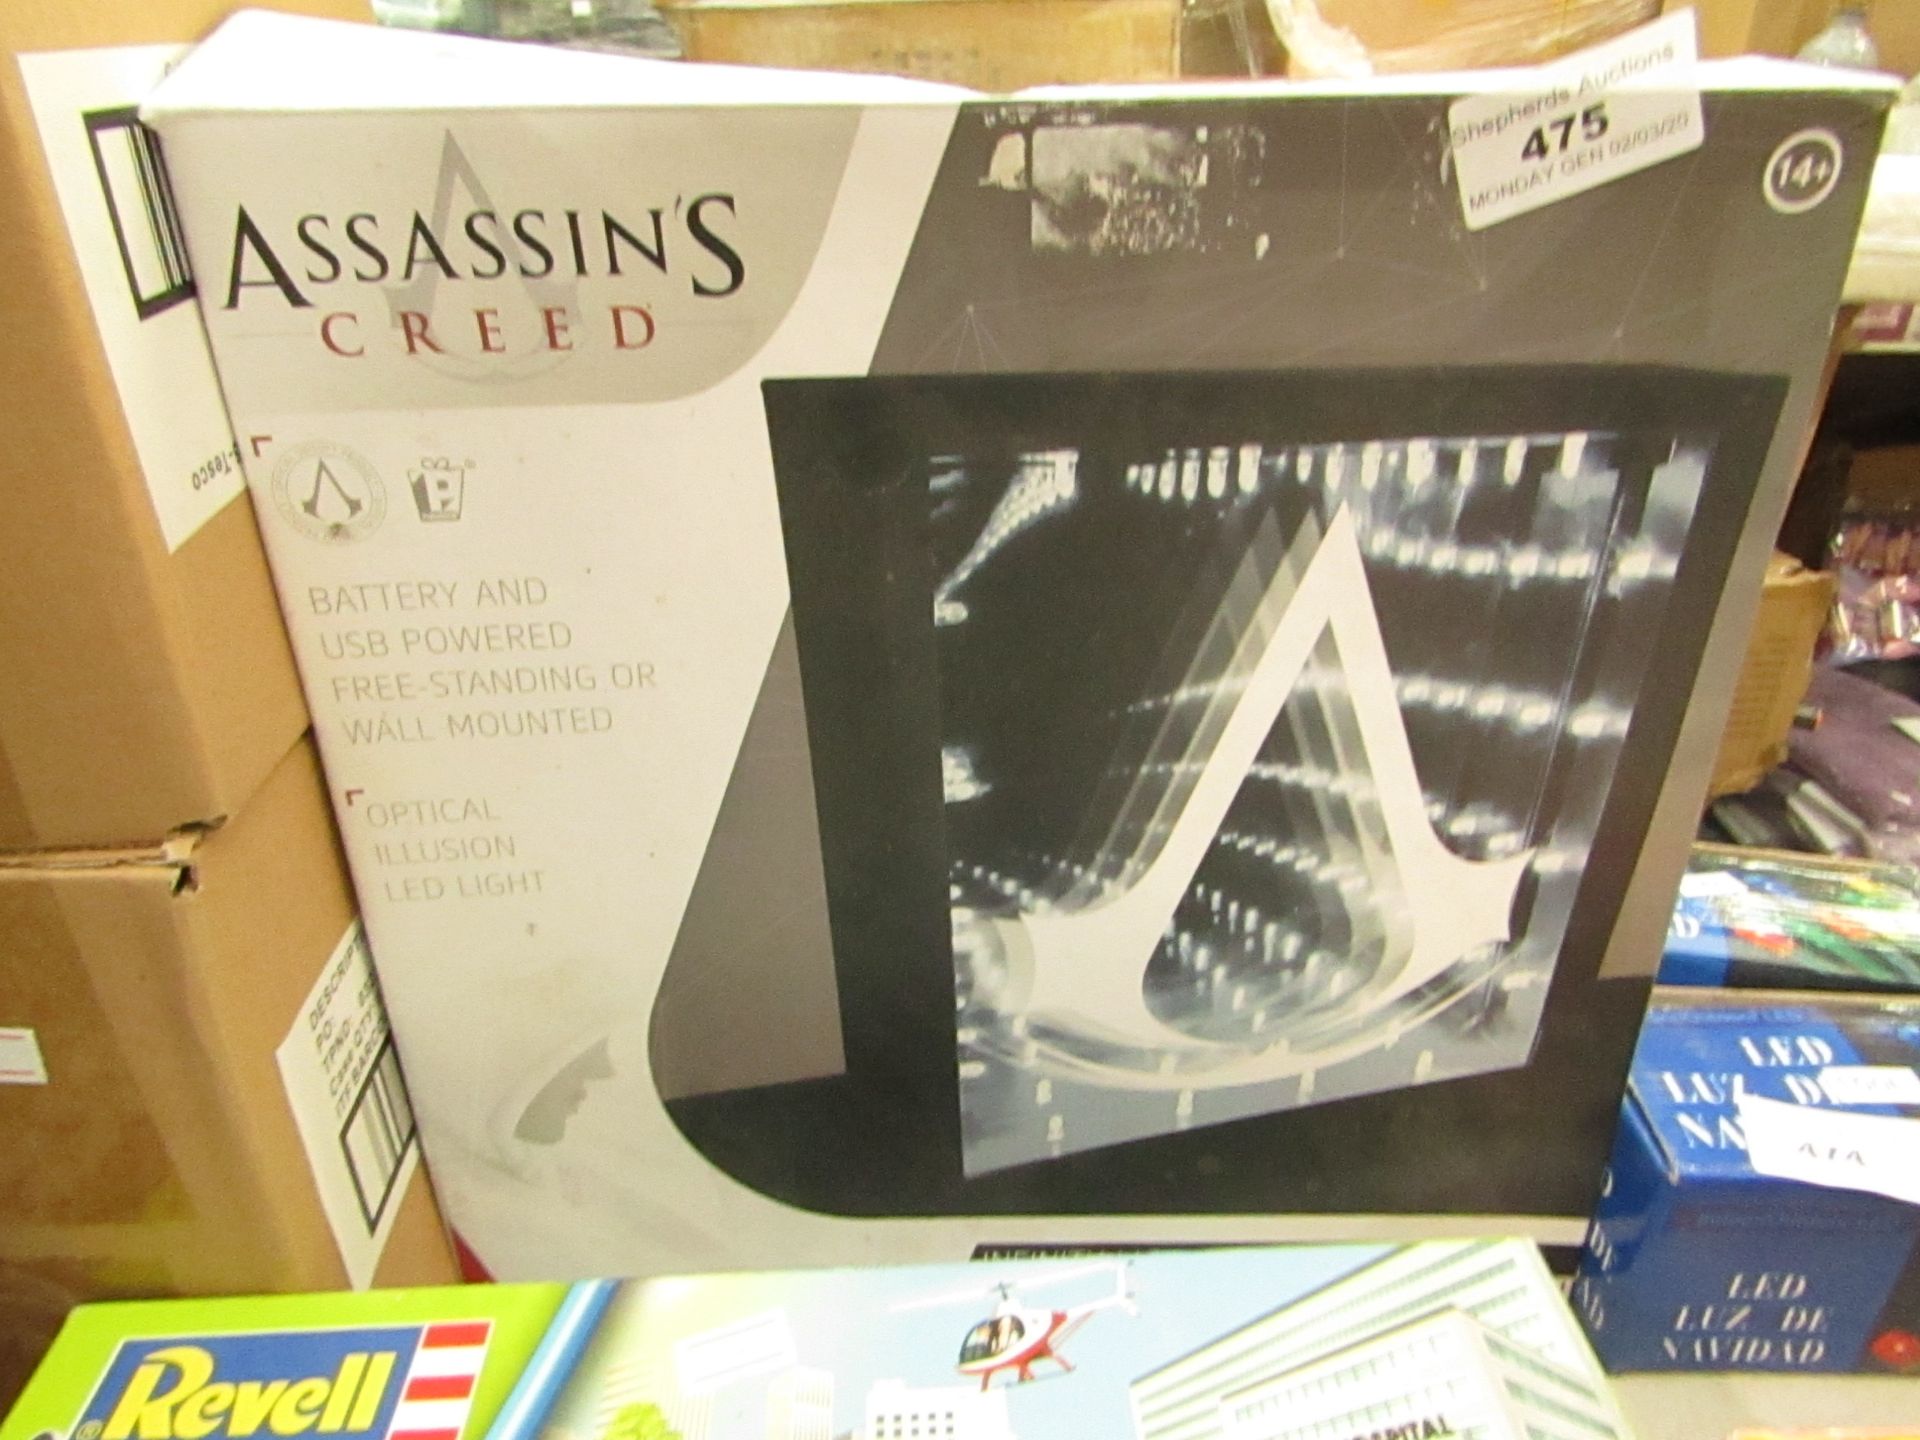 Assassins Creed - USB Powered LED Light (Free-Standing or Wall Mounted) - Boxed.